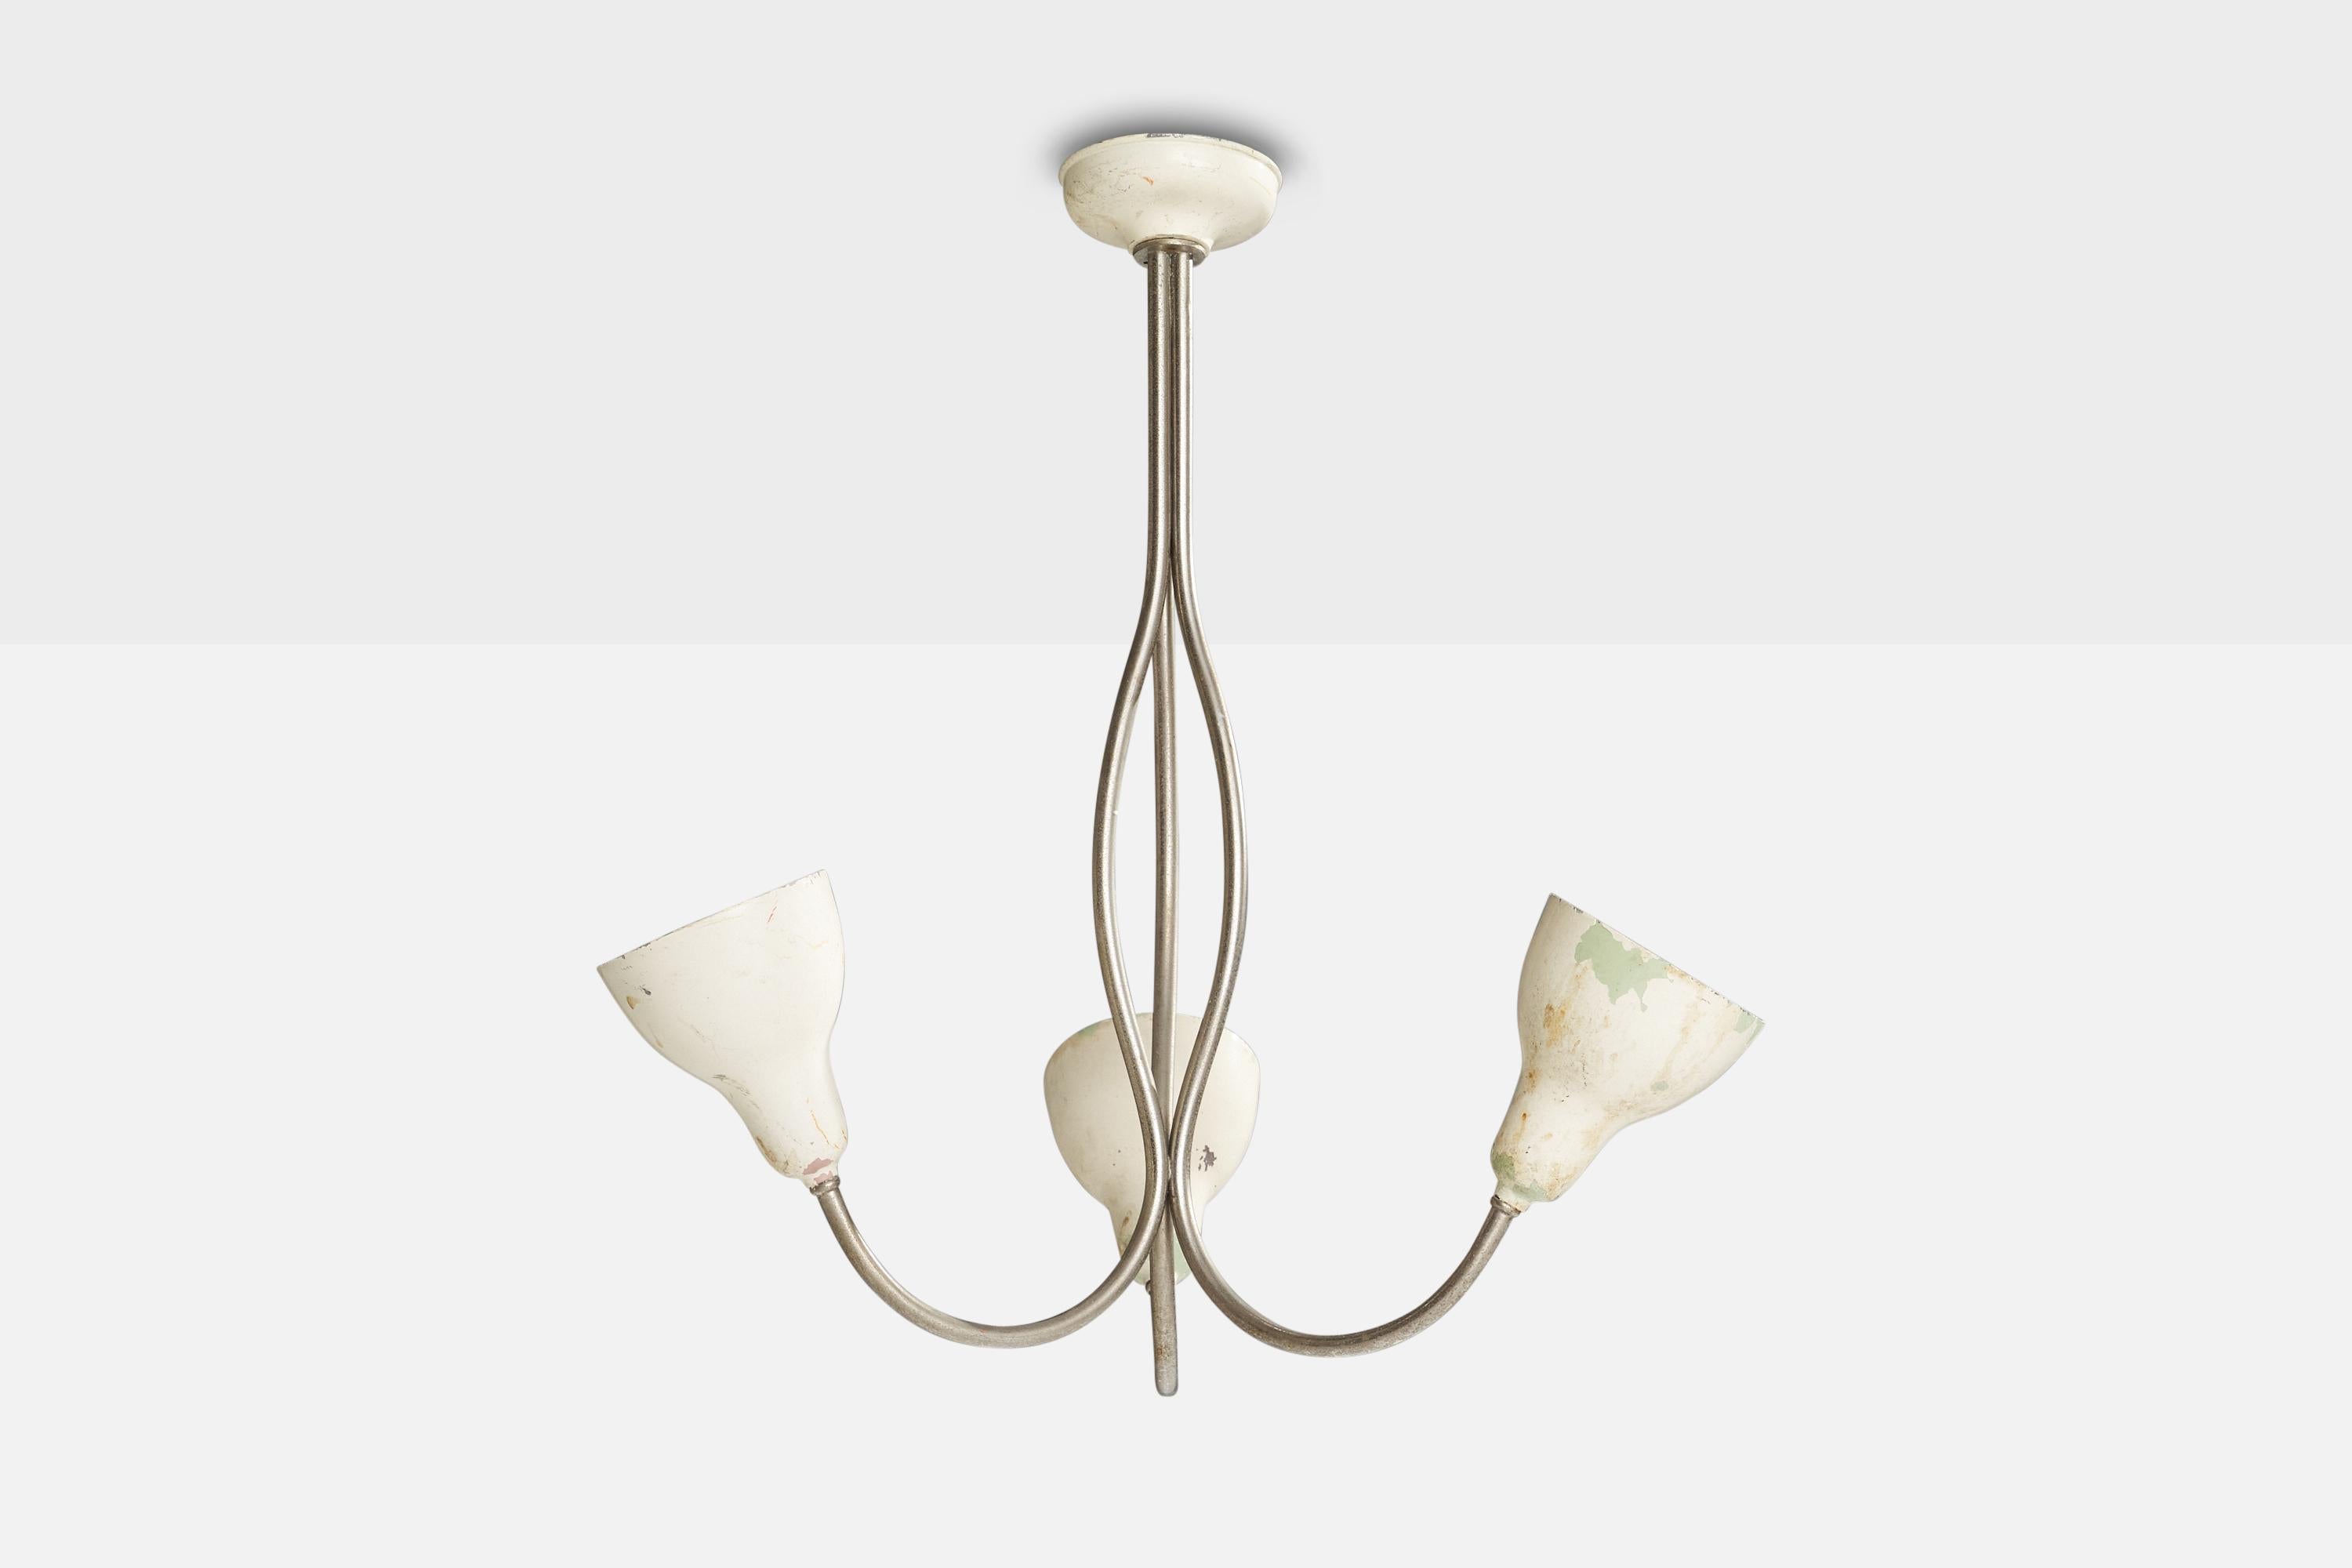 A white and green painted metal chandelier designed and produced in Italy, 1950s.

Dimensions of canopy (inches): 2” H x 5”  Diameter
Socket takes standard E-26 bulbs. 3 sockets.There is no maximum wattage stated on the fixture. All lighting will be